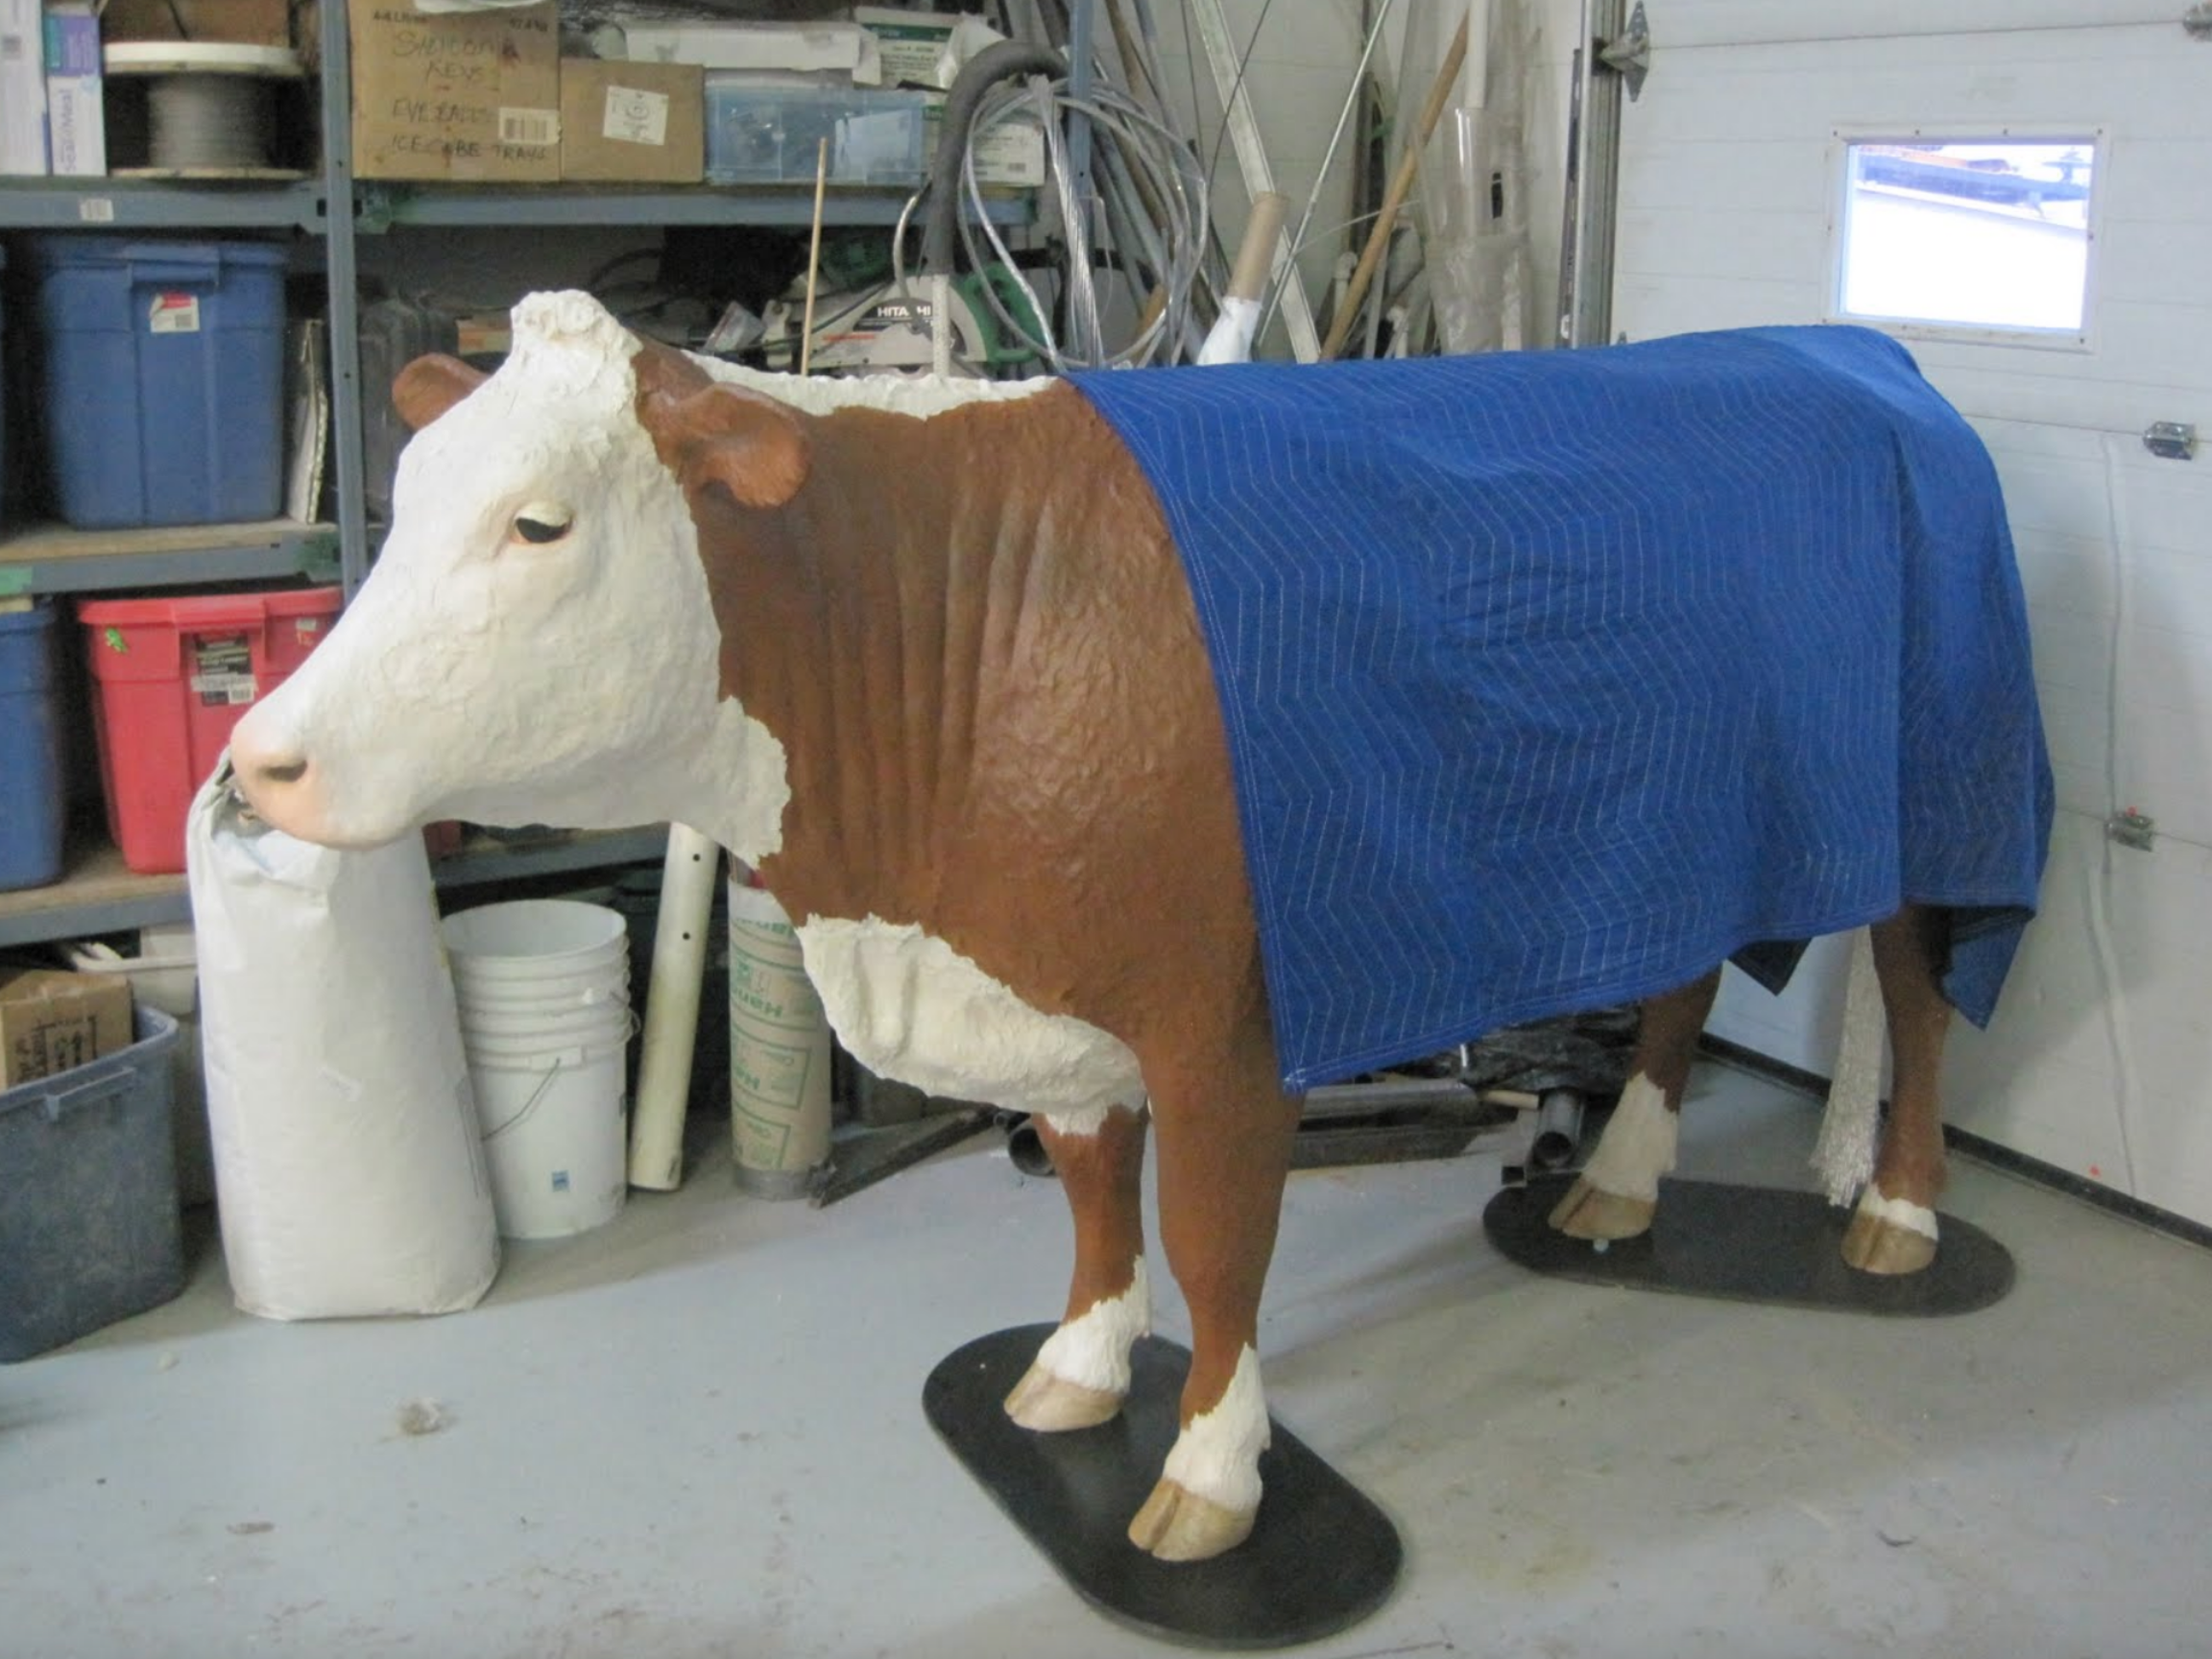  This completed Hereford model traveled to the University of Saskatchewan Western College of Veterinary Medicine for a demonstration of the simulator for members of the faculty. We also demonstrated an equine colic simulator prototype and gathered fe